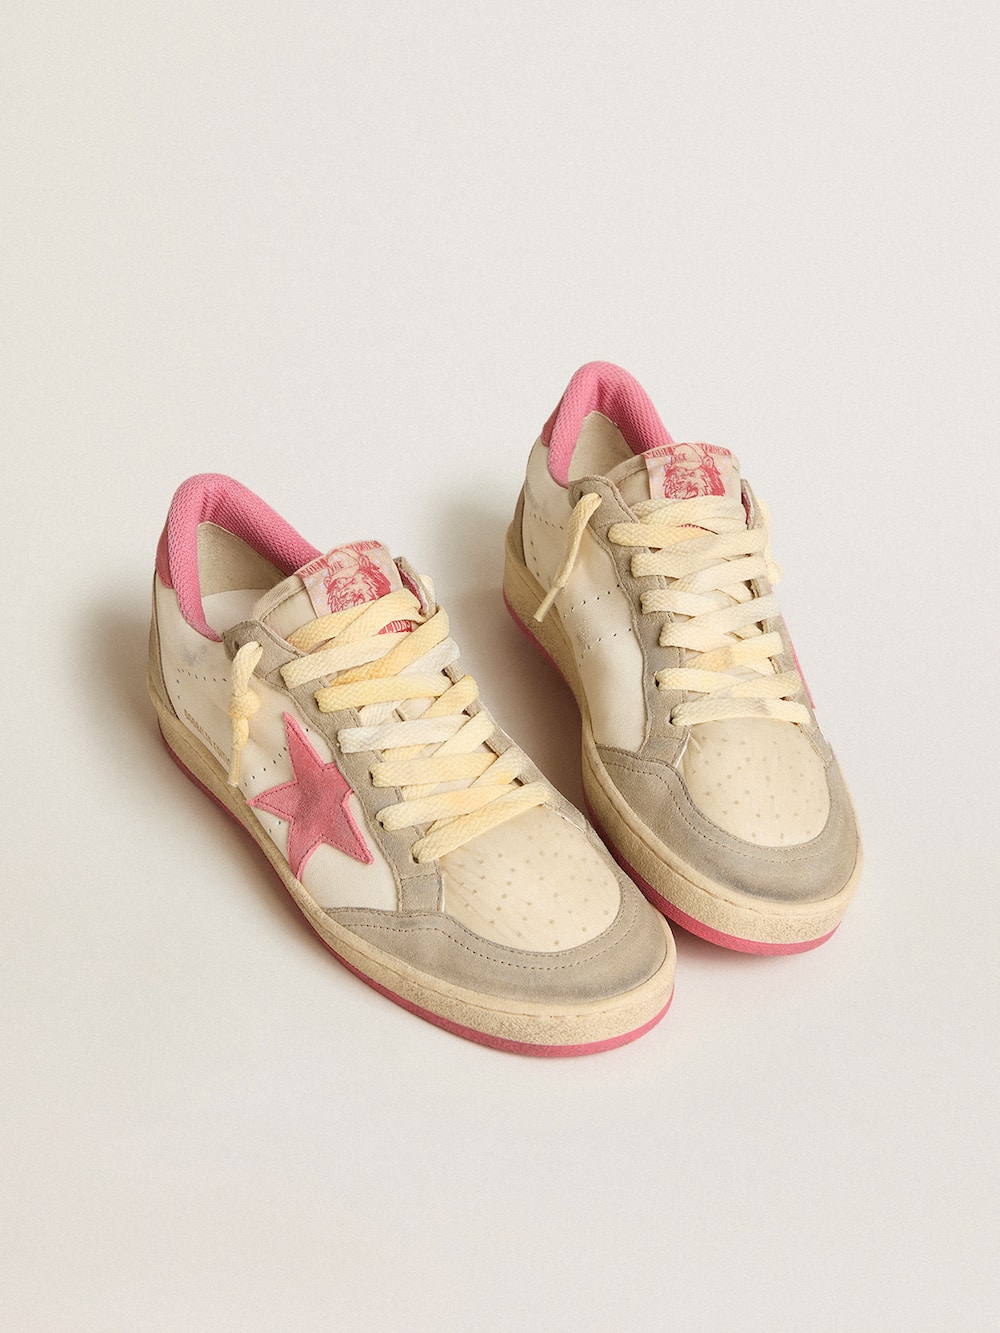 Golden Goose - Women's Ball Star LTD in nappa with pink suede star and dove-gray inserts in 